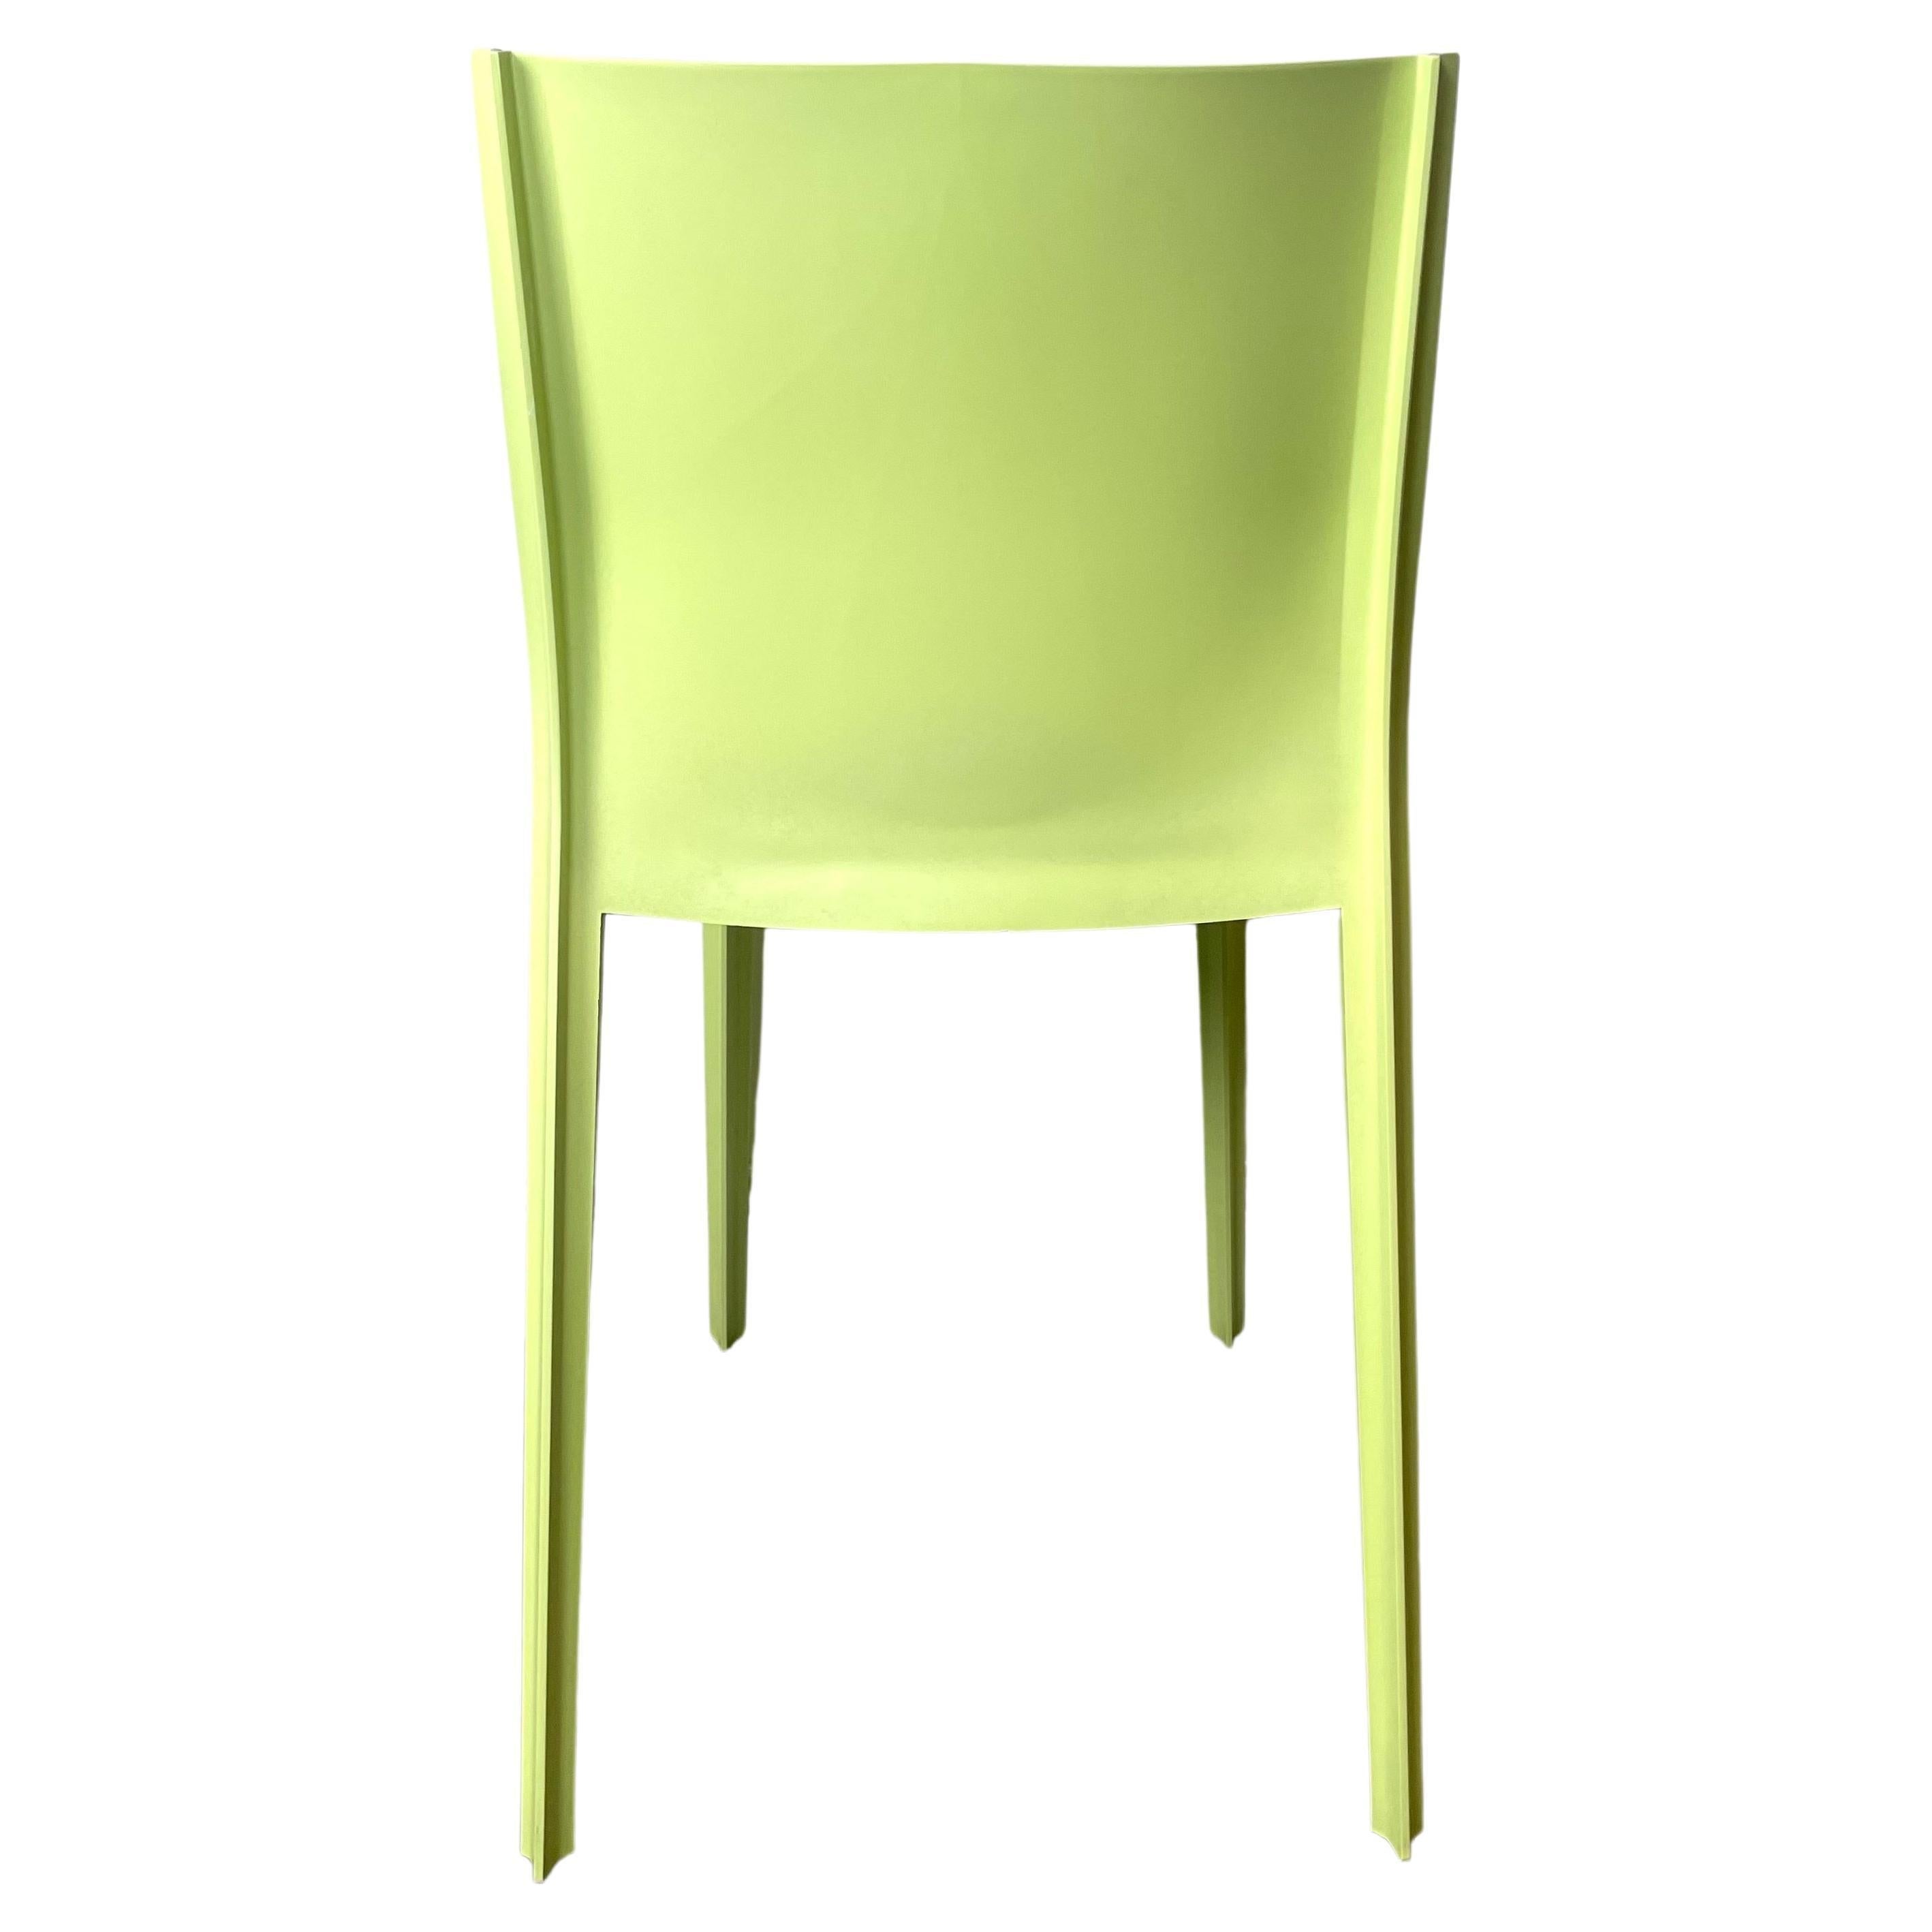 Set of 2 design chairs by the French Philippe Starck, named Slick Slick XO.
Design plastic chairs, very decorative and solid.

Slick Slick is the most essential chair. It is emblematic of Starck's creativity and vision. He wants to offer the right